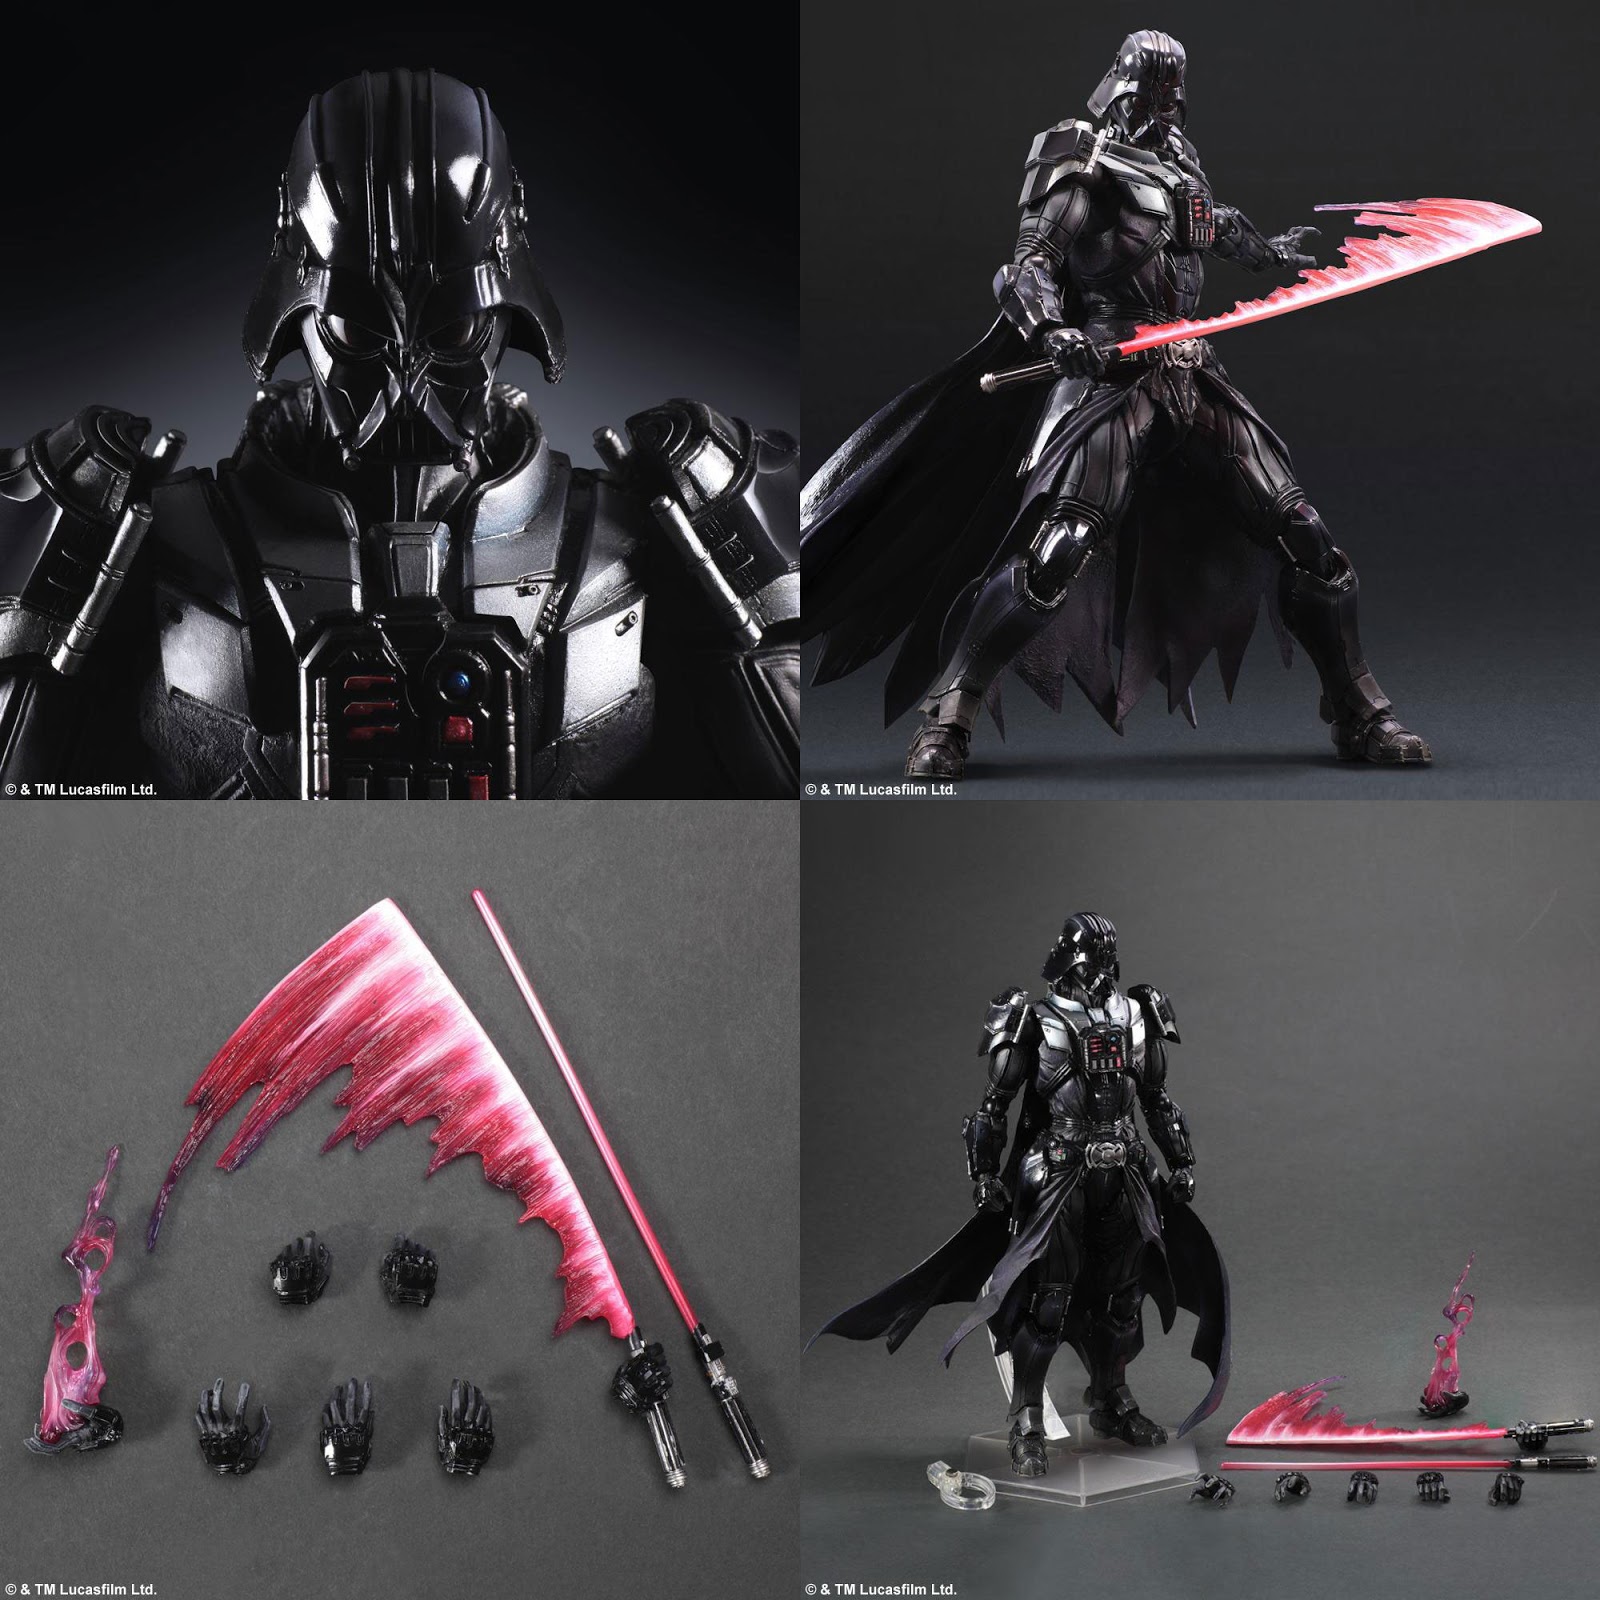 Star Wars Variant Play Arts Kai from SQUARE ENIX - VADER Star Wars Variant Play Arts Kai From SQUARE ENIX 2